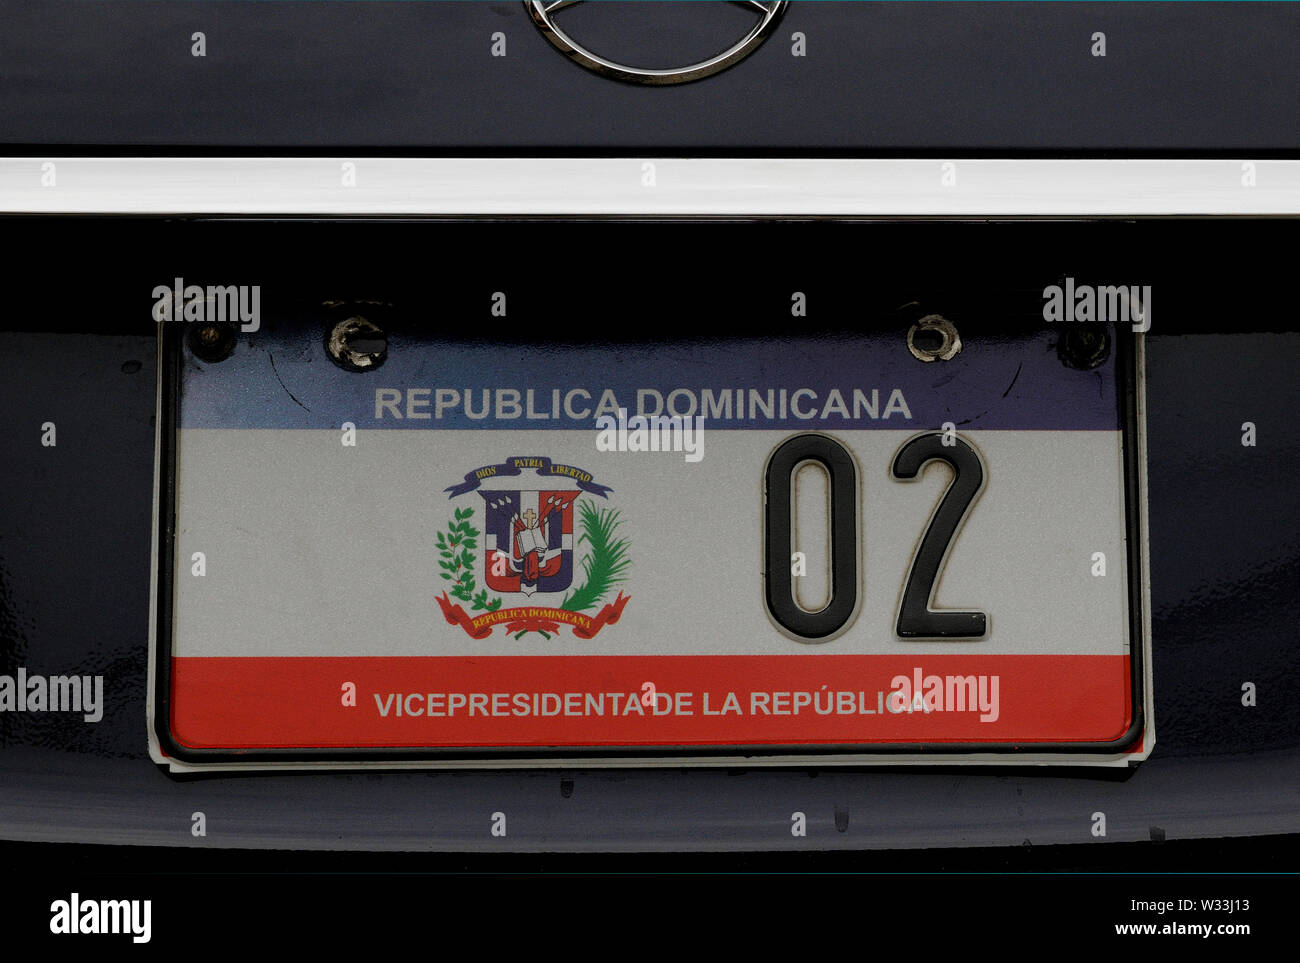 santo domingo. dominican republic - november 01, 2013: the registration plate at the official  limousine of the vice president of the dominican republ Stock Photo